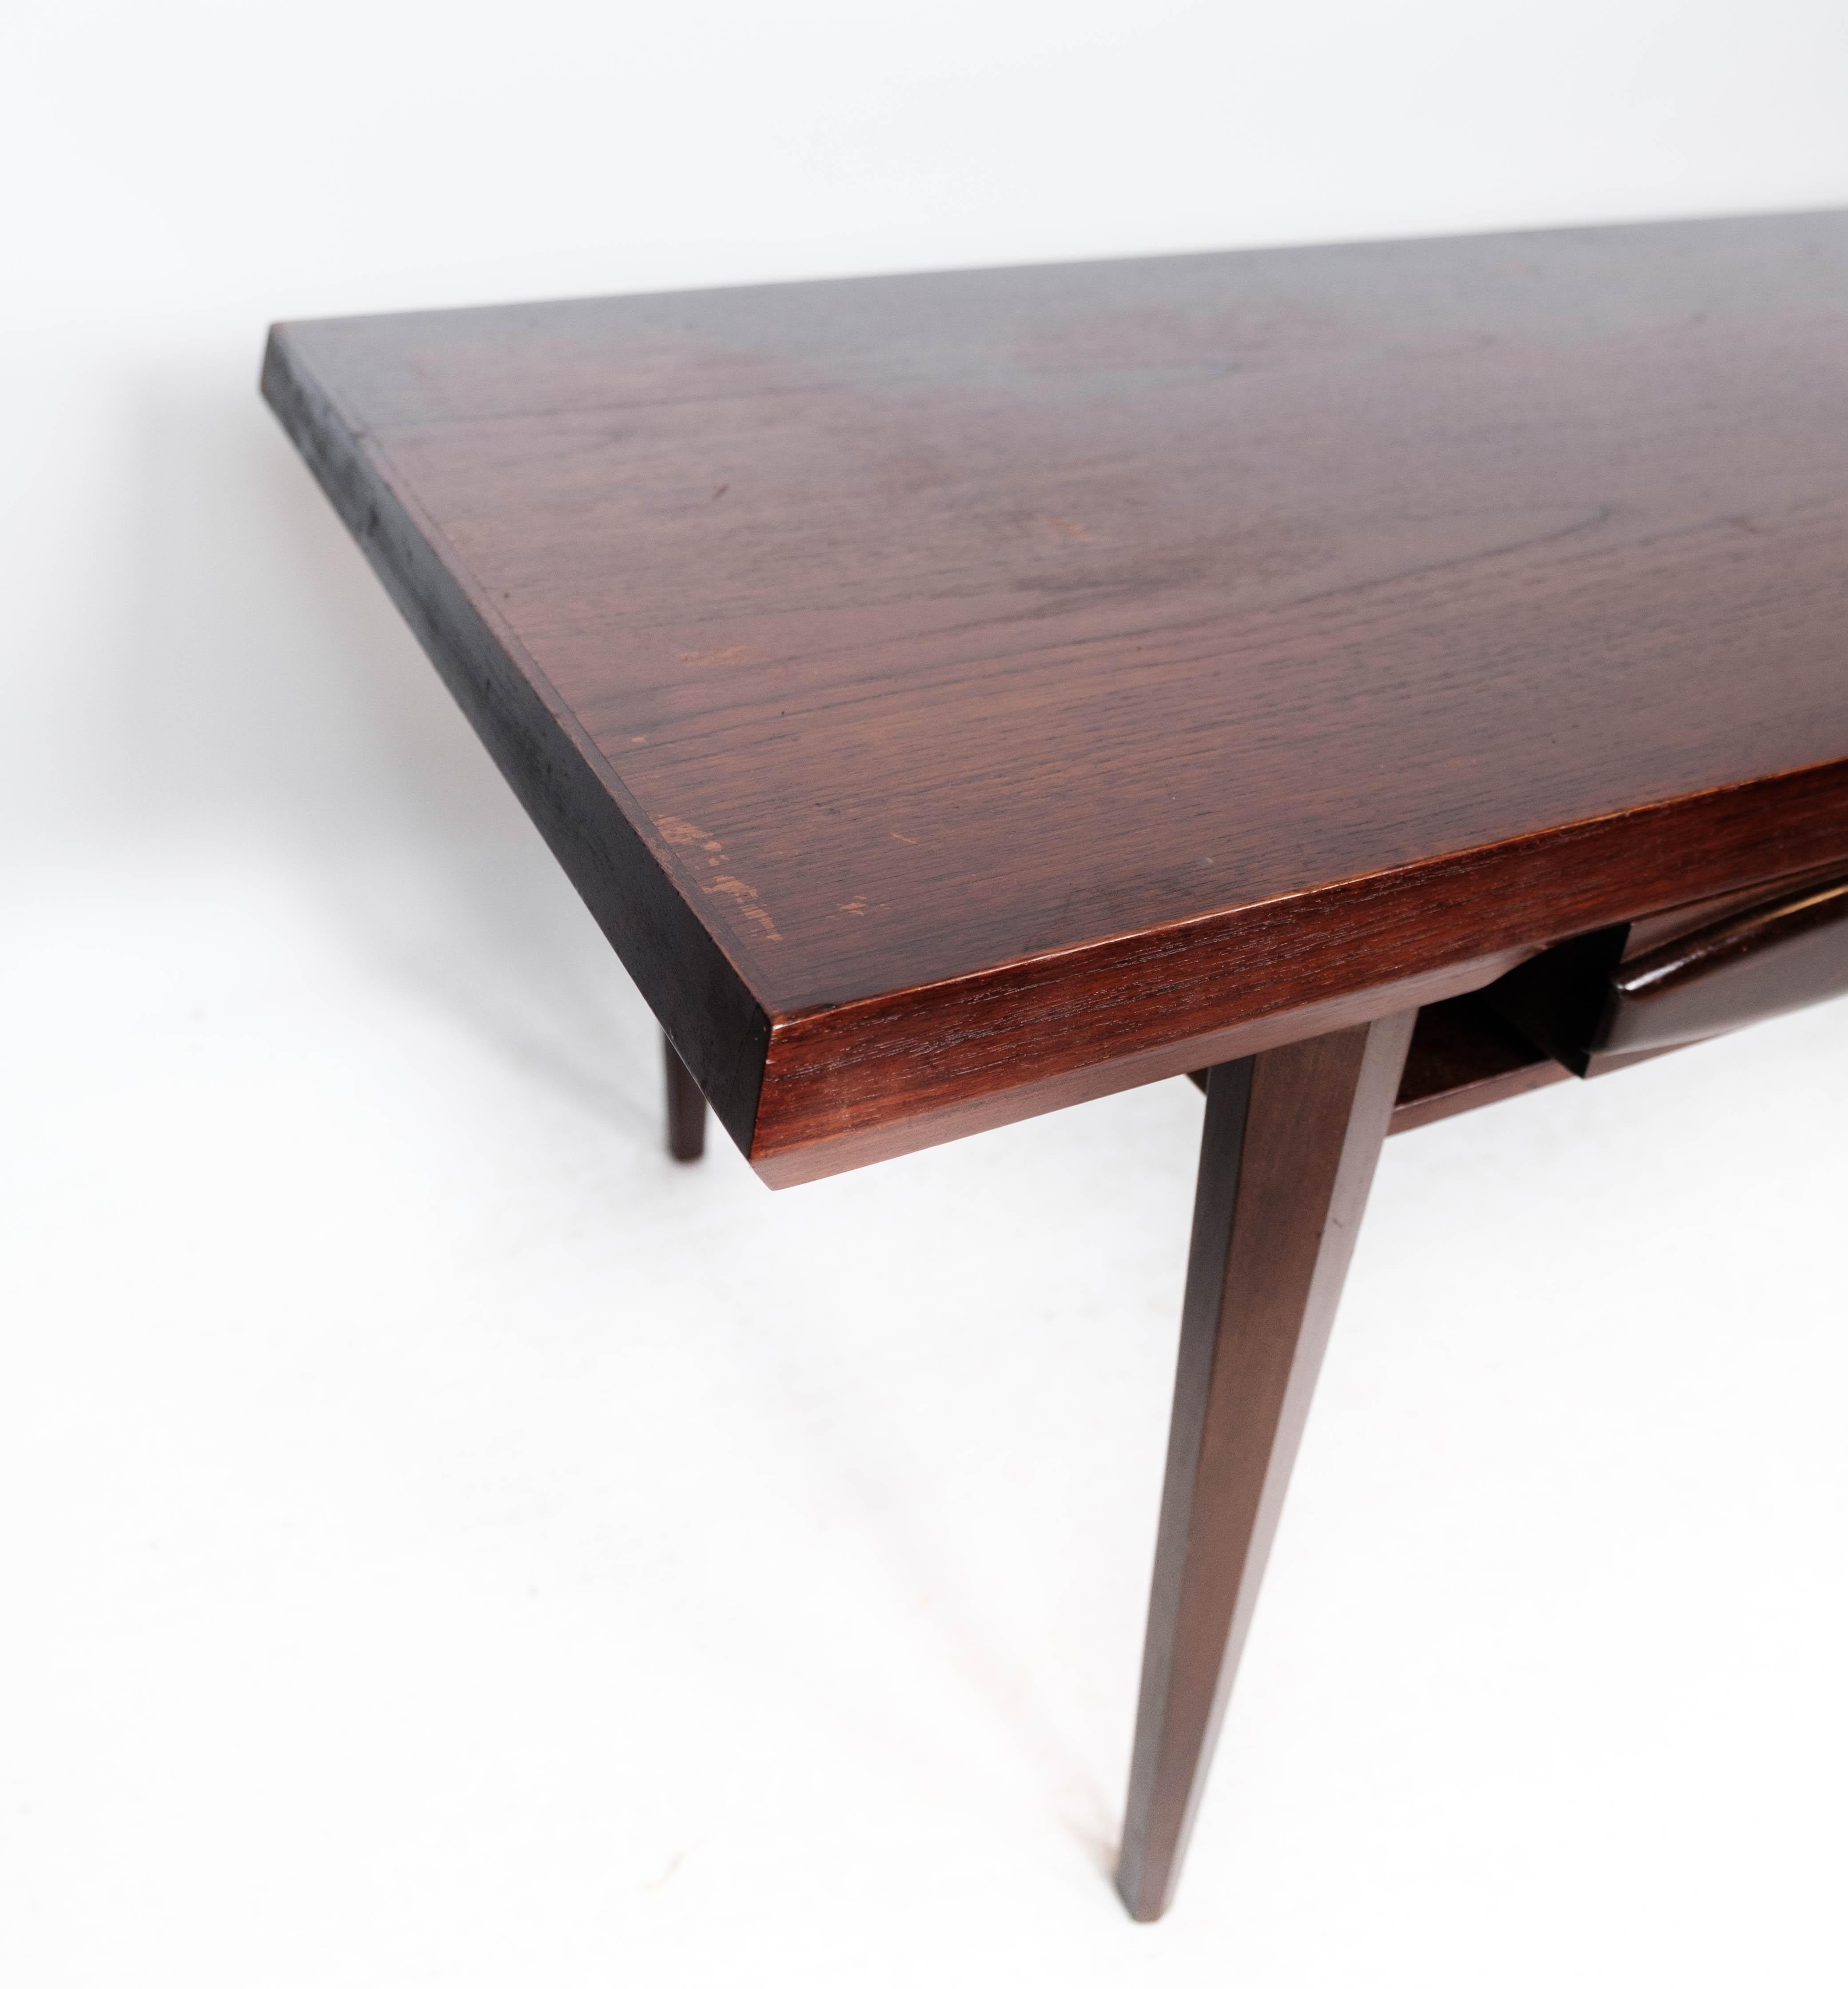 Mid-Century Modern Coffee Table Made In Teak With Drawers From 1960s For Sale